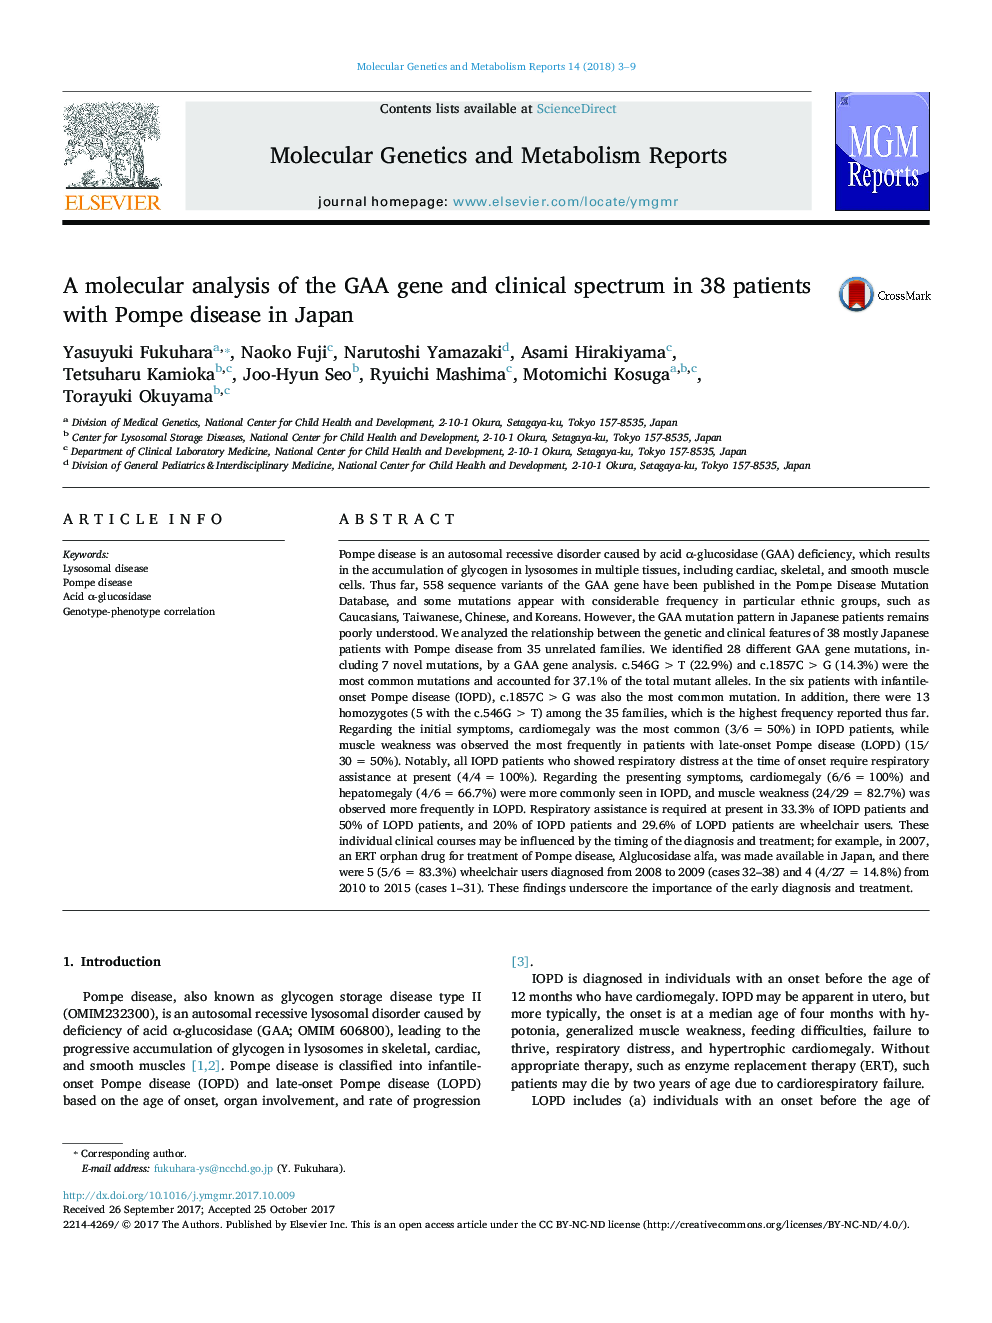 A molecular analysis of the GAA gene and clinical spectrum in 38 patients with Pompe disease in Japan